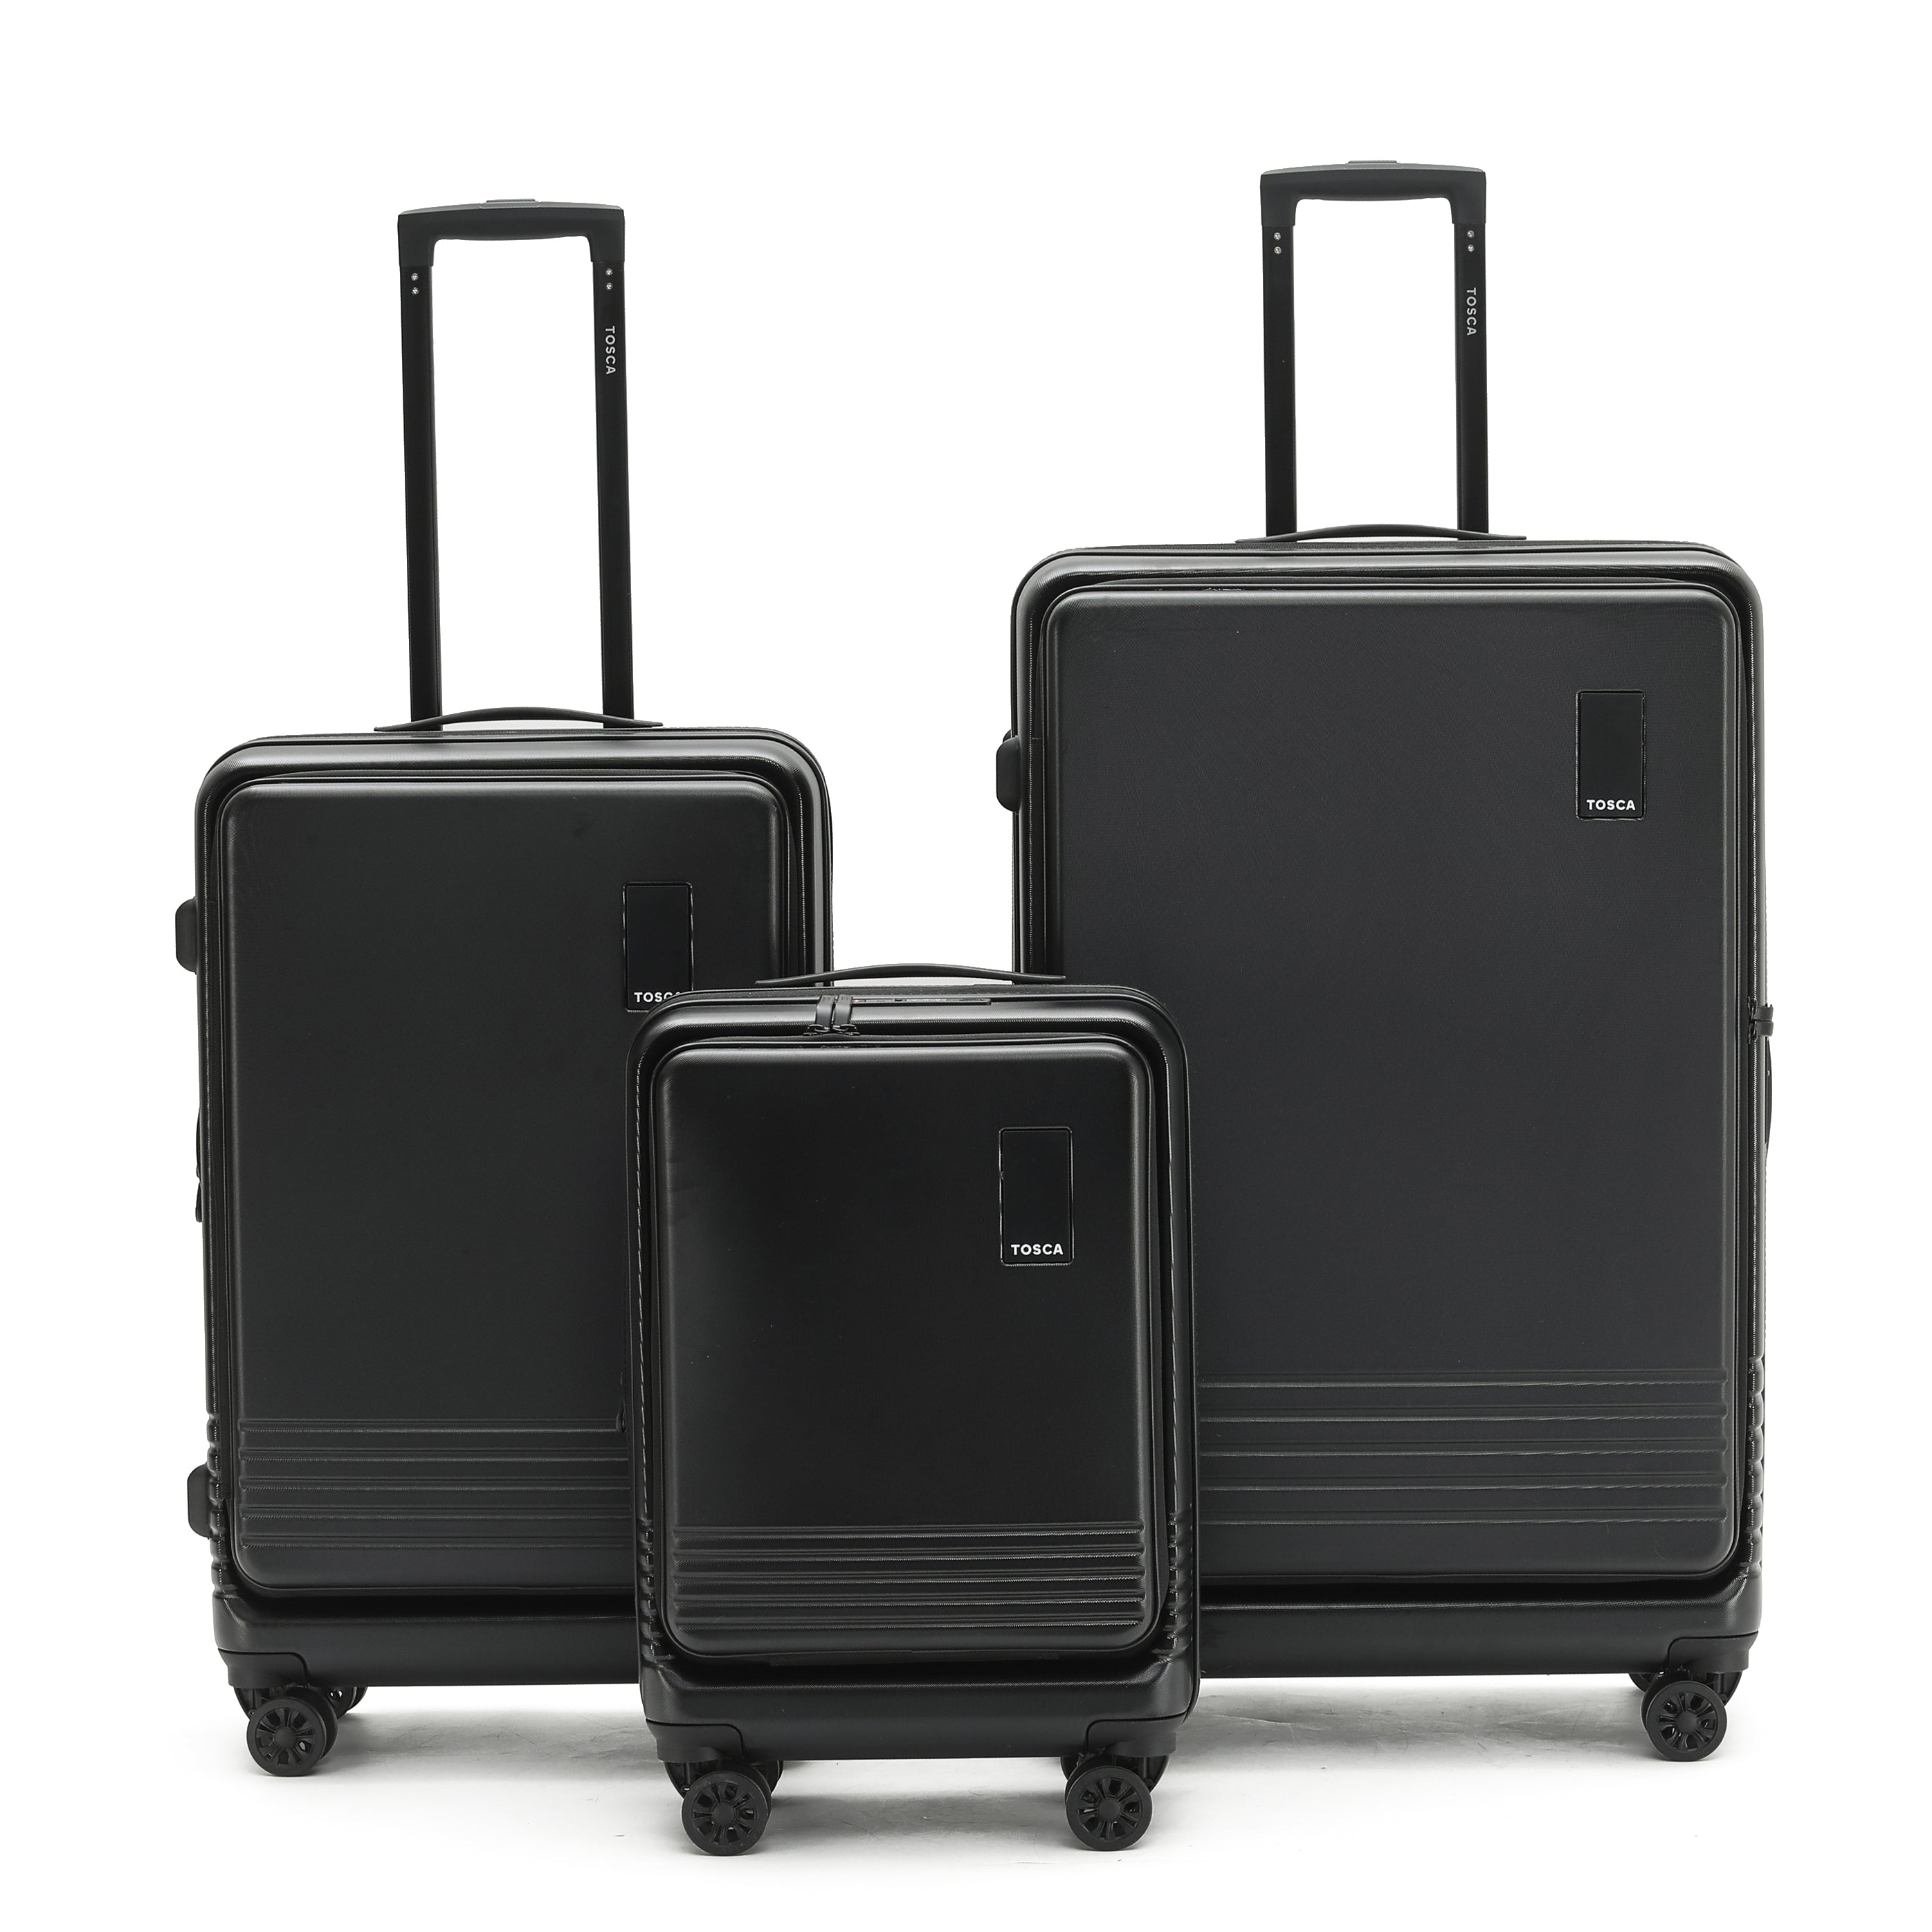 Tosca - TCA644 Horizon Front lid opening Set of 3 suitcases - Black-1